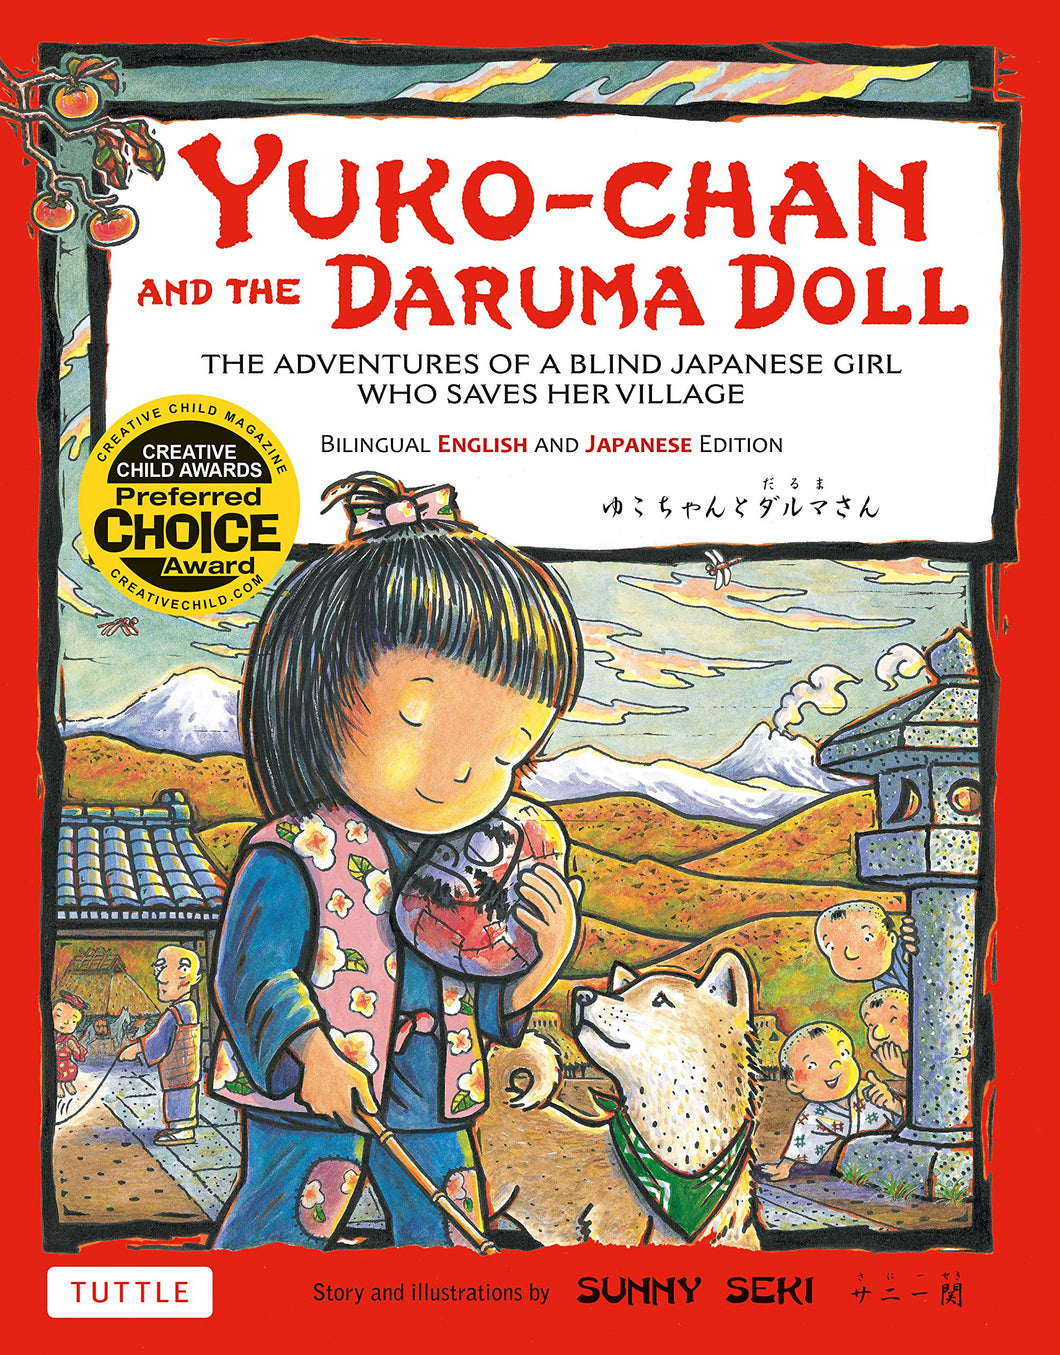 Yuko-chan and the Daruma Doll: The Adventures of a Blind Japanese Girl Who Saves Her Village (Bilingual English/Japanese)